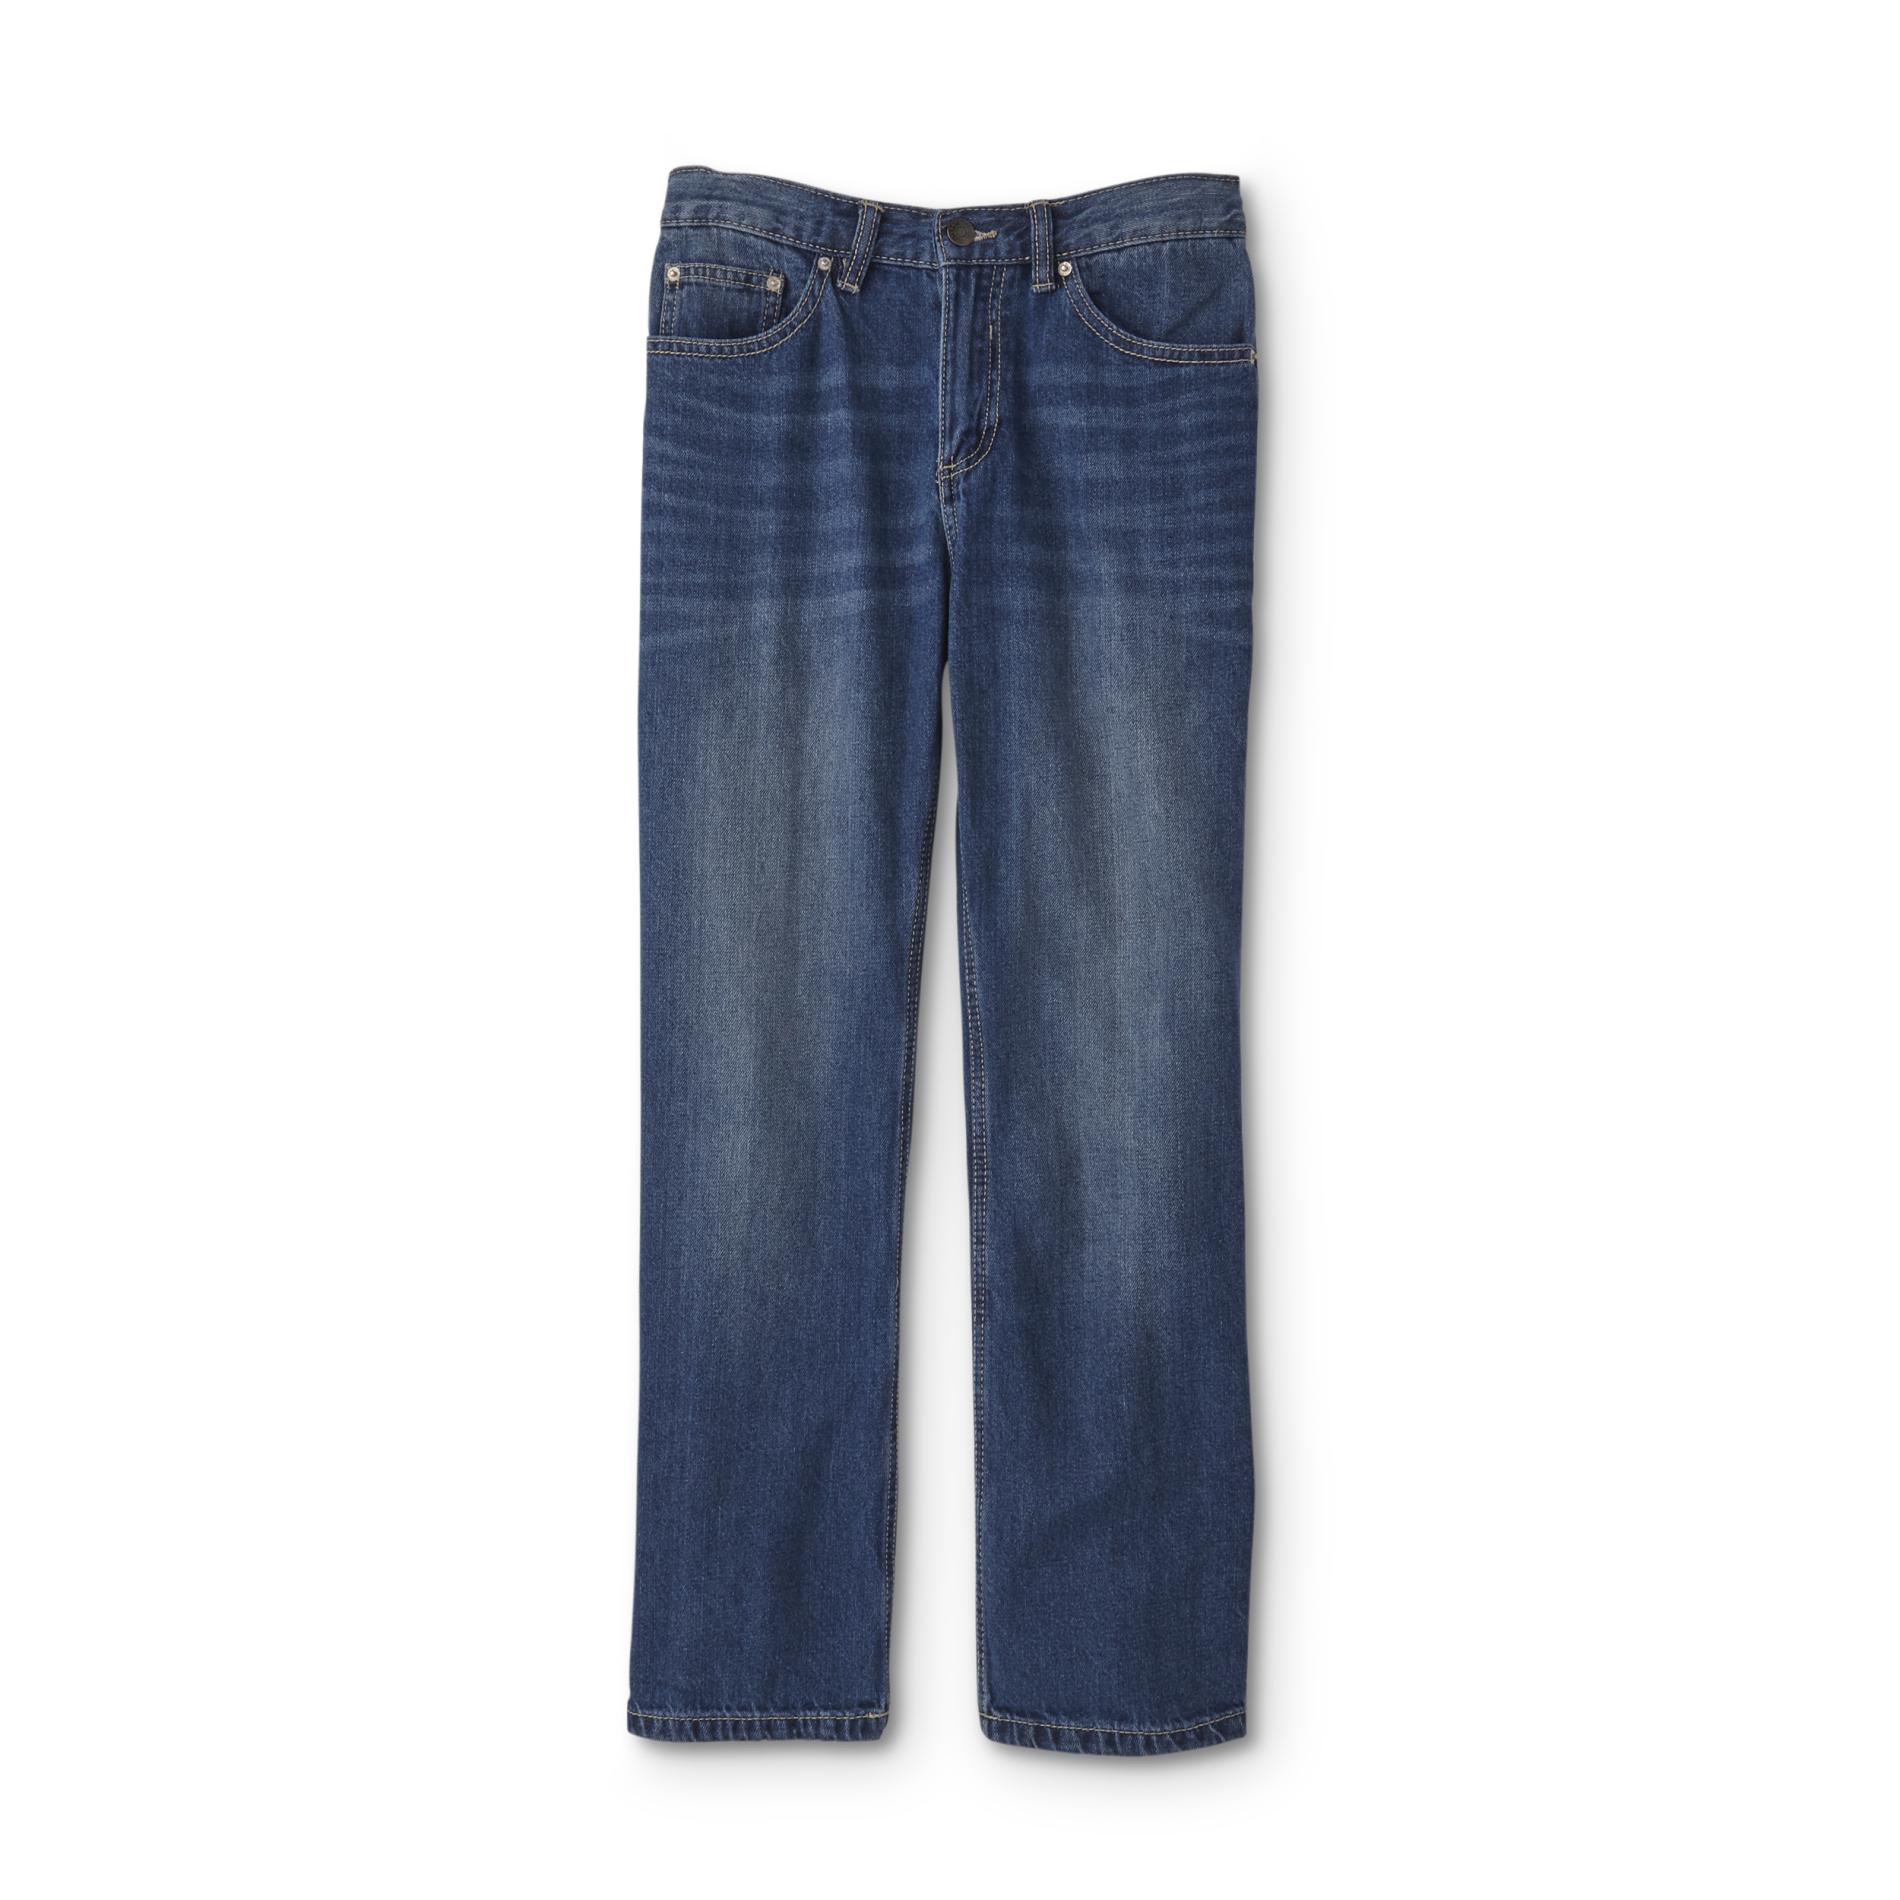 Route 66 Boys' Husky Relaxed Fit Jeans